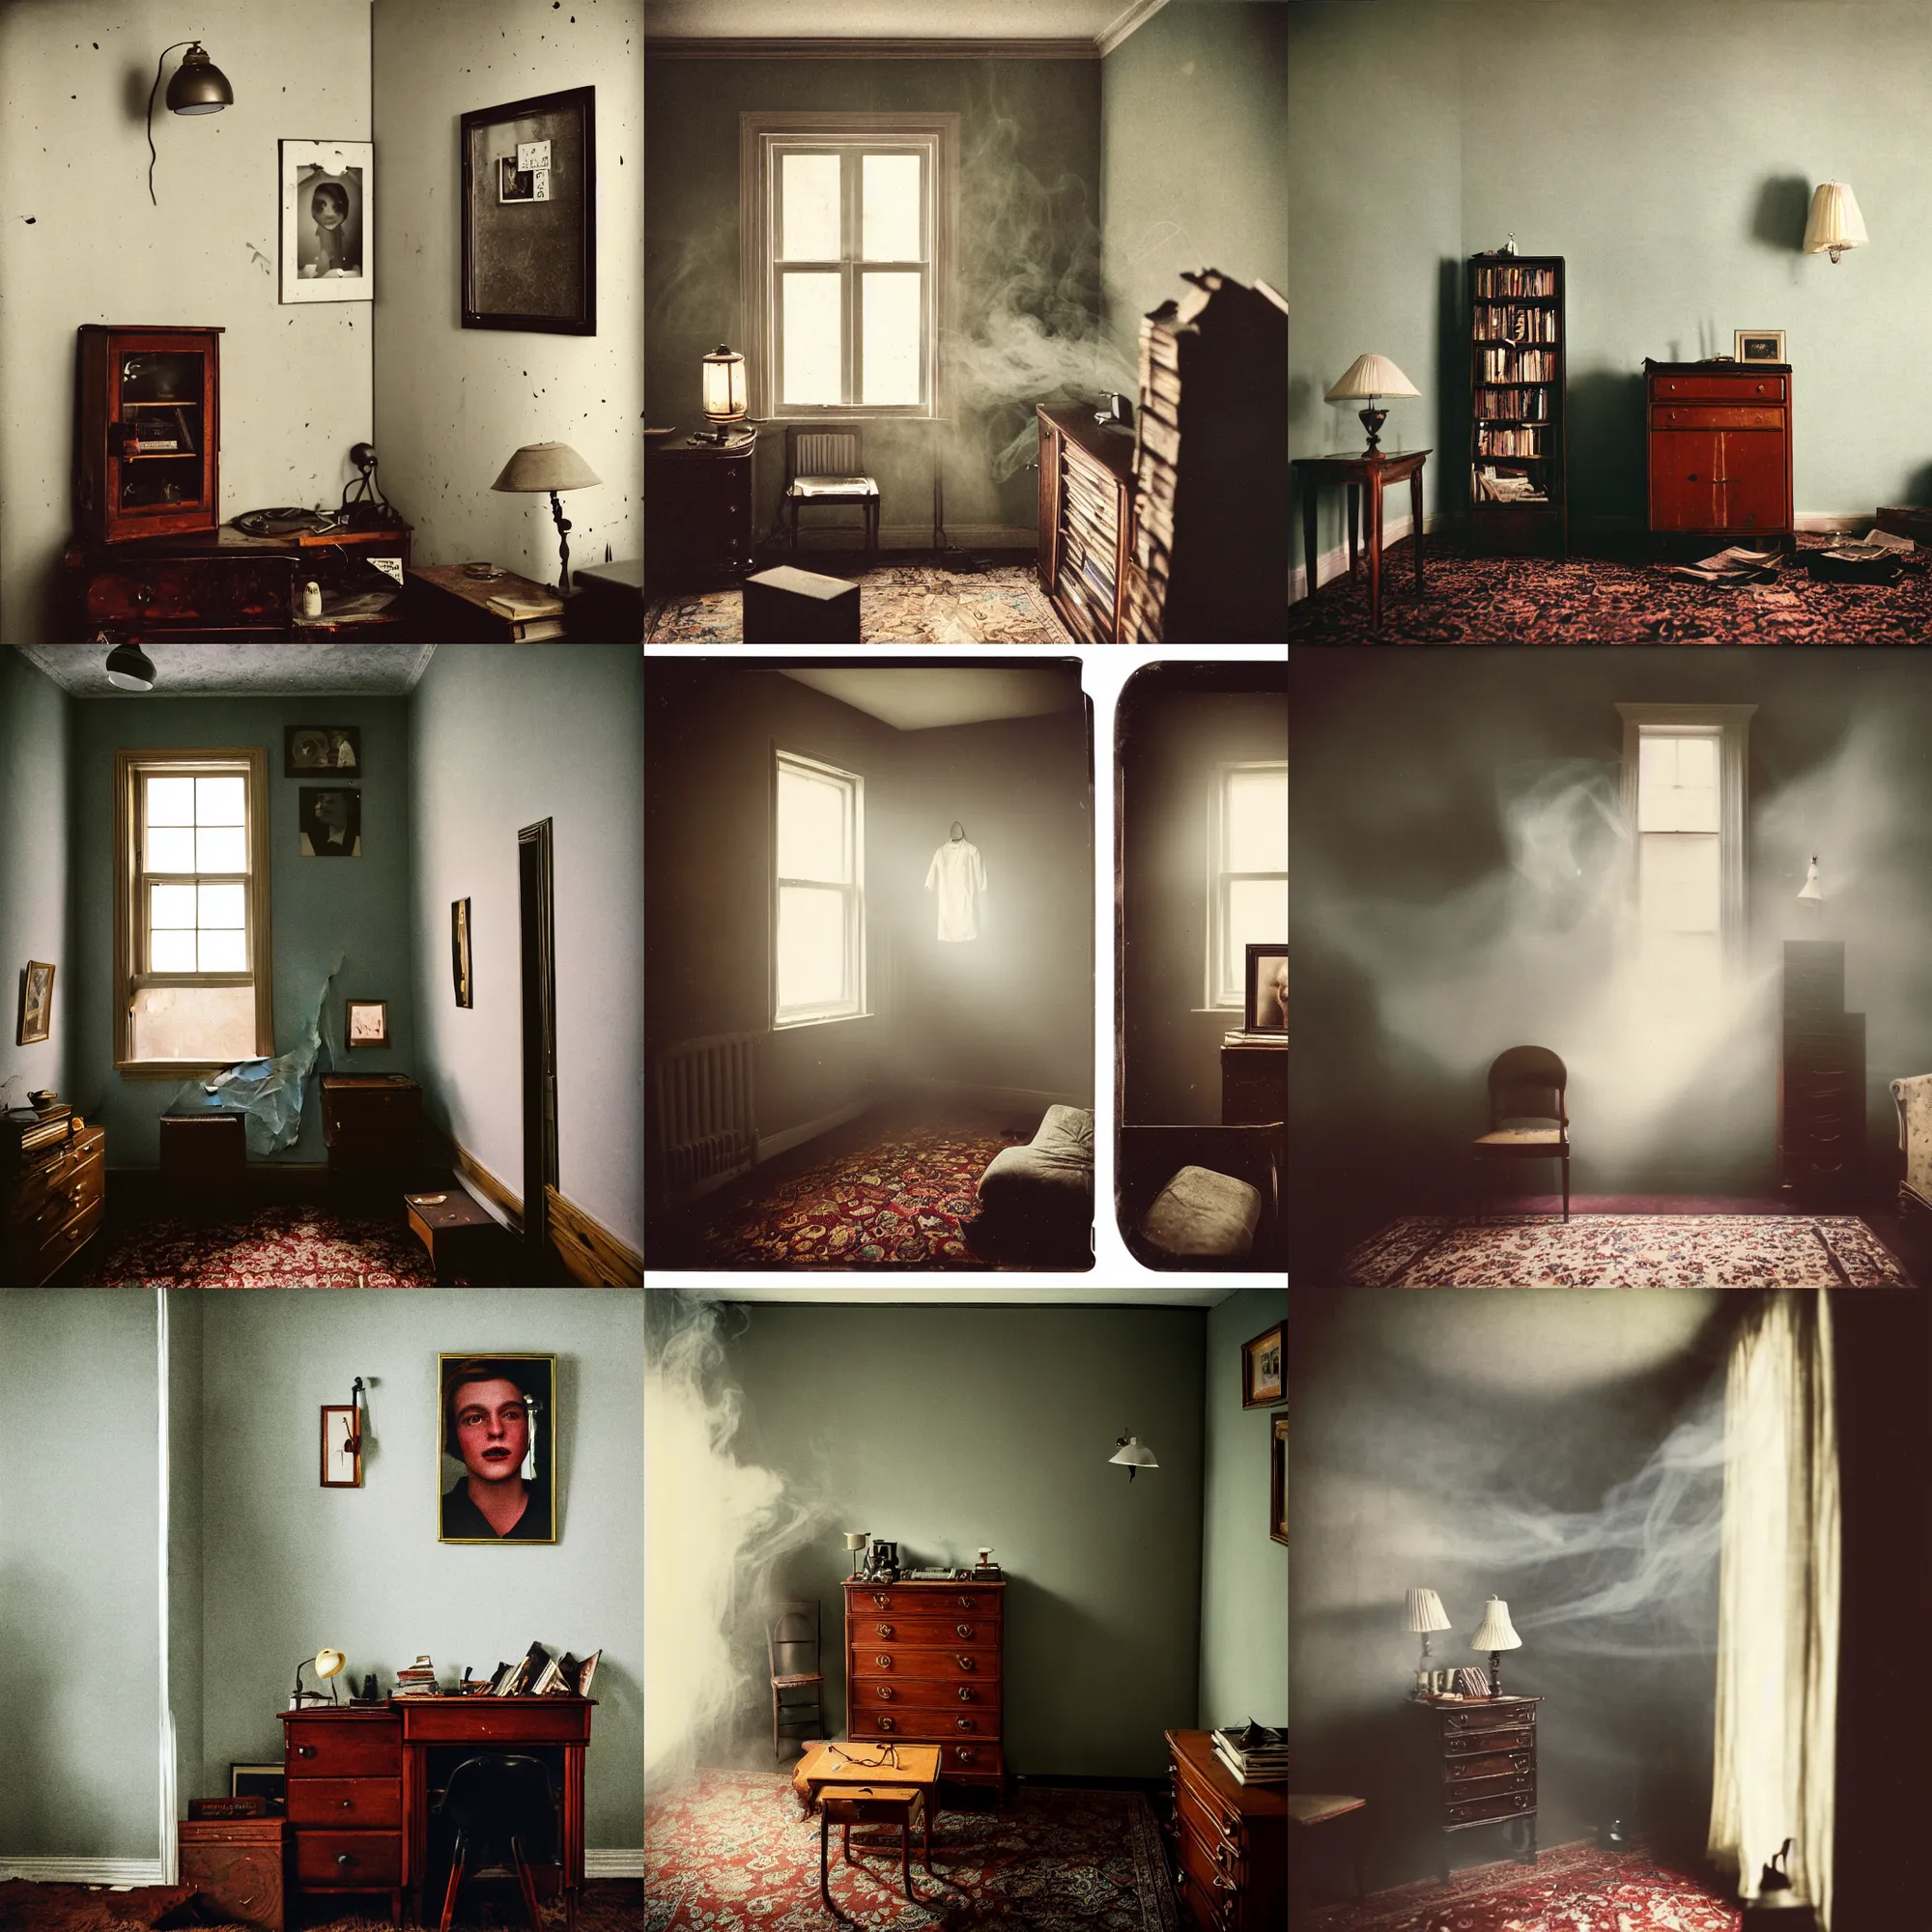 Prompt: kodak portra 4 0 0, wetplate, 8 mm extreme fisheye, award - winning portrait by britt marling, a handome boy, 1 9 2 0 s room, ghost, picture frames, shining lamps, dust, smoke, 1 9 2 0 s furniture, wallpaper, carpet, books, muted colours, wood, fog,